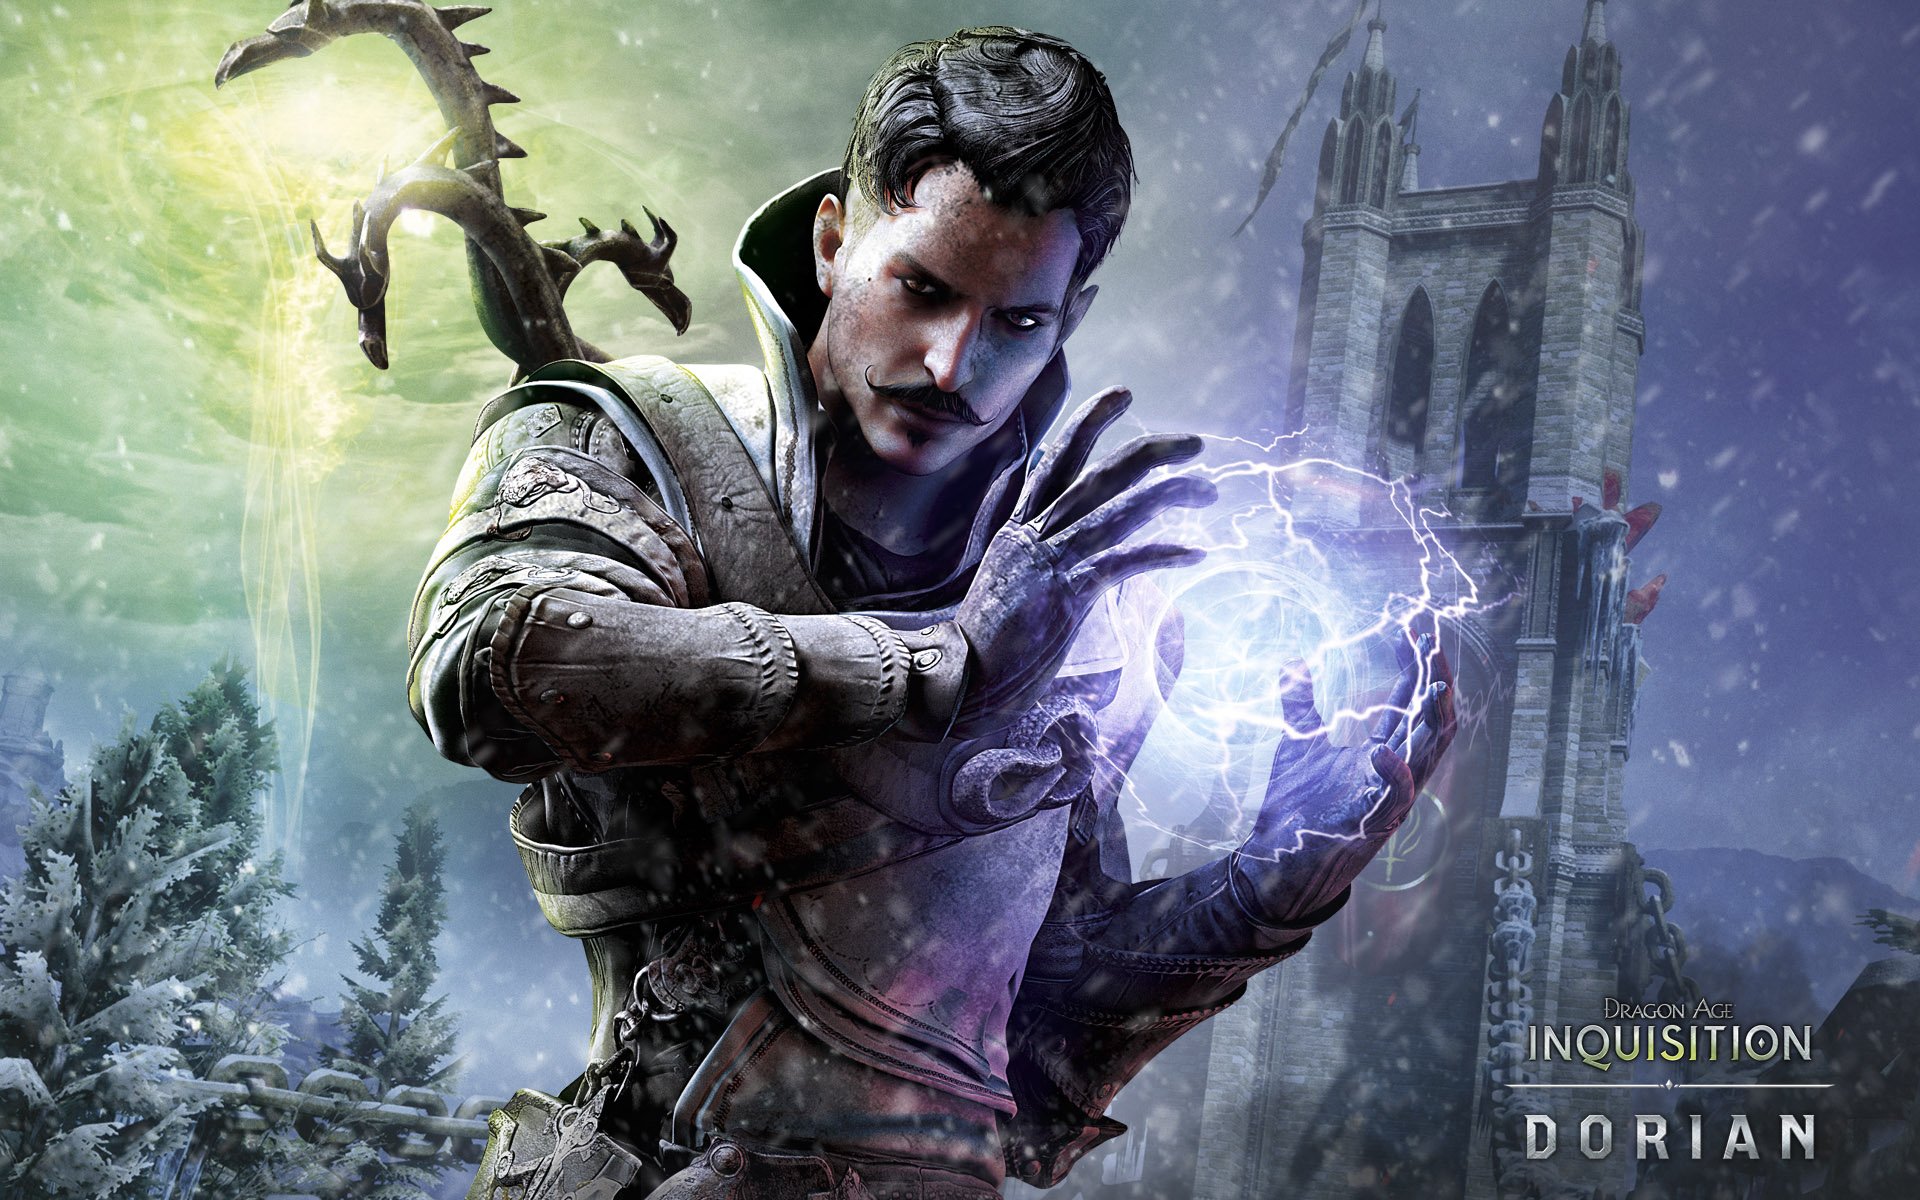 Dragon Age: Inquisition Full HD Wallpaper and Background Image